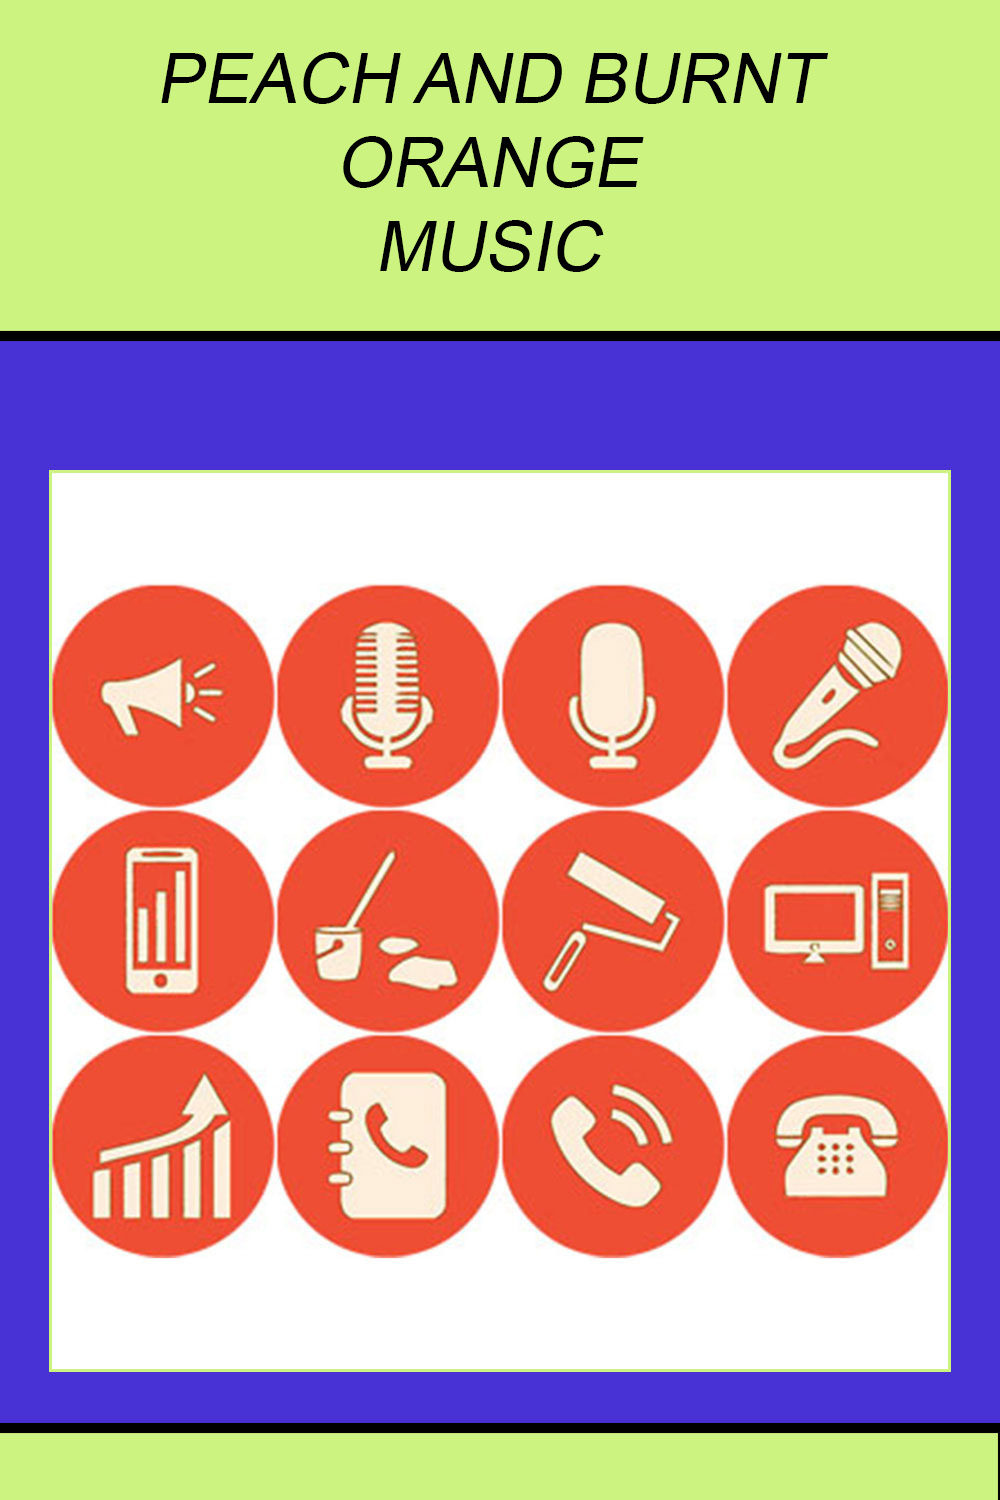 PEACH AND BURNT ORANGE MUSIC ROUND ICONS pinterest preview image.